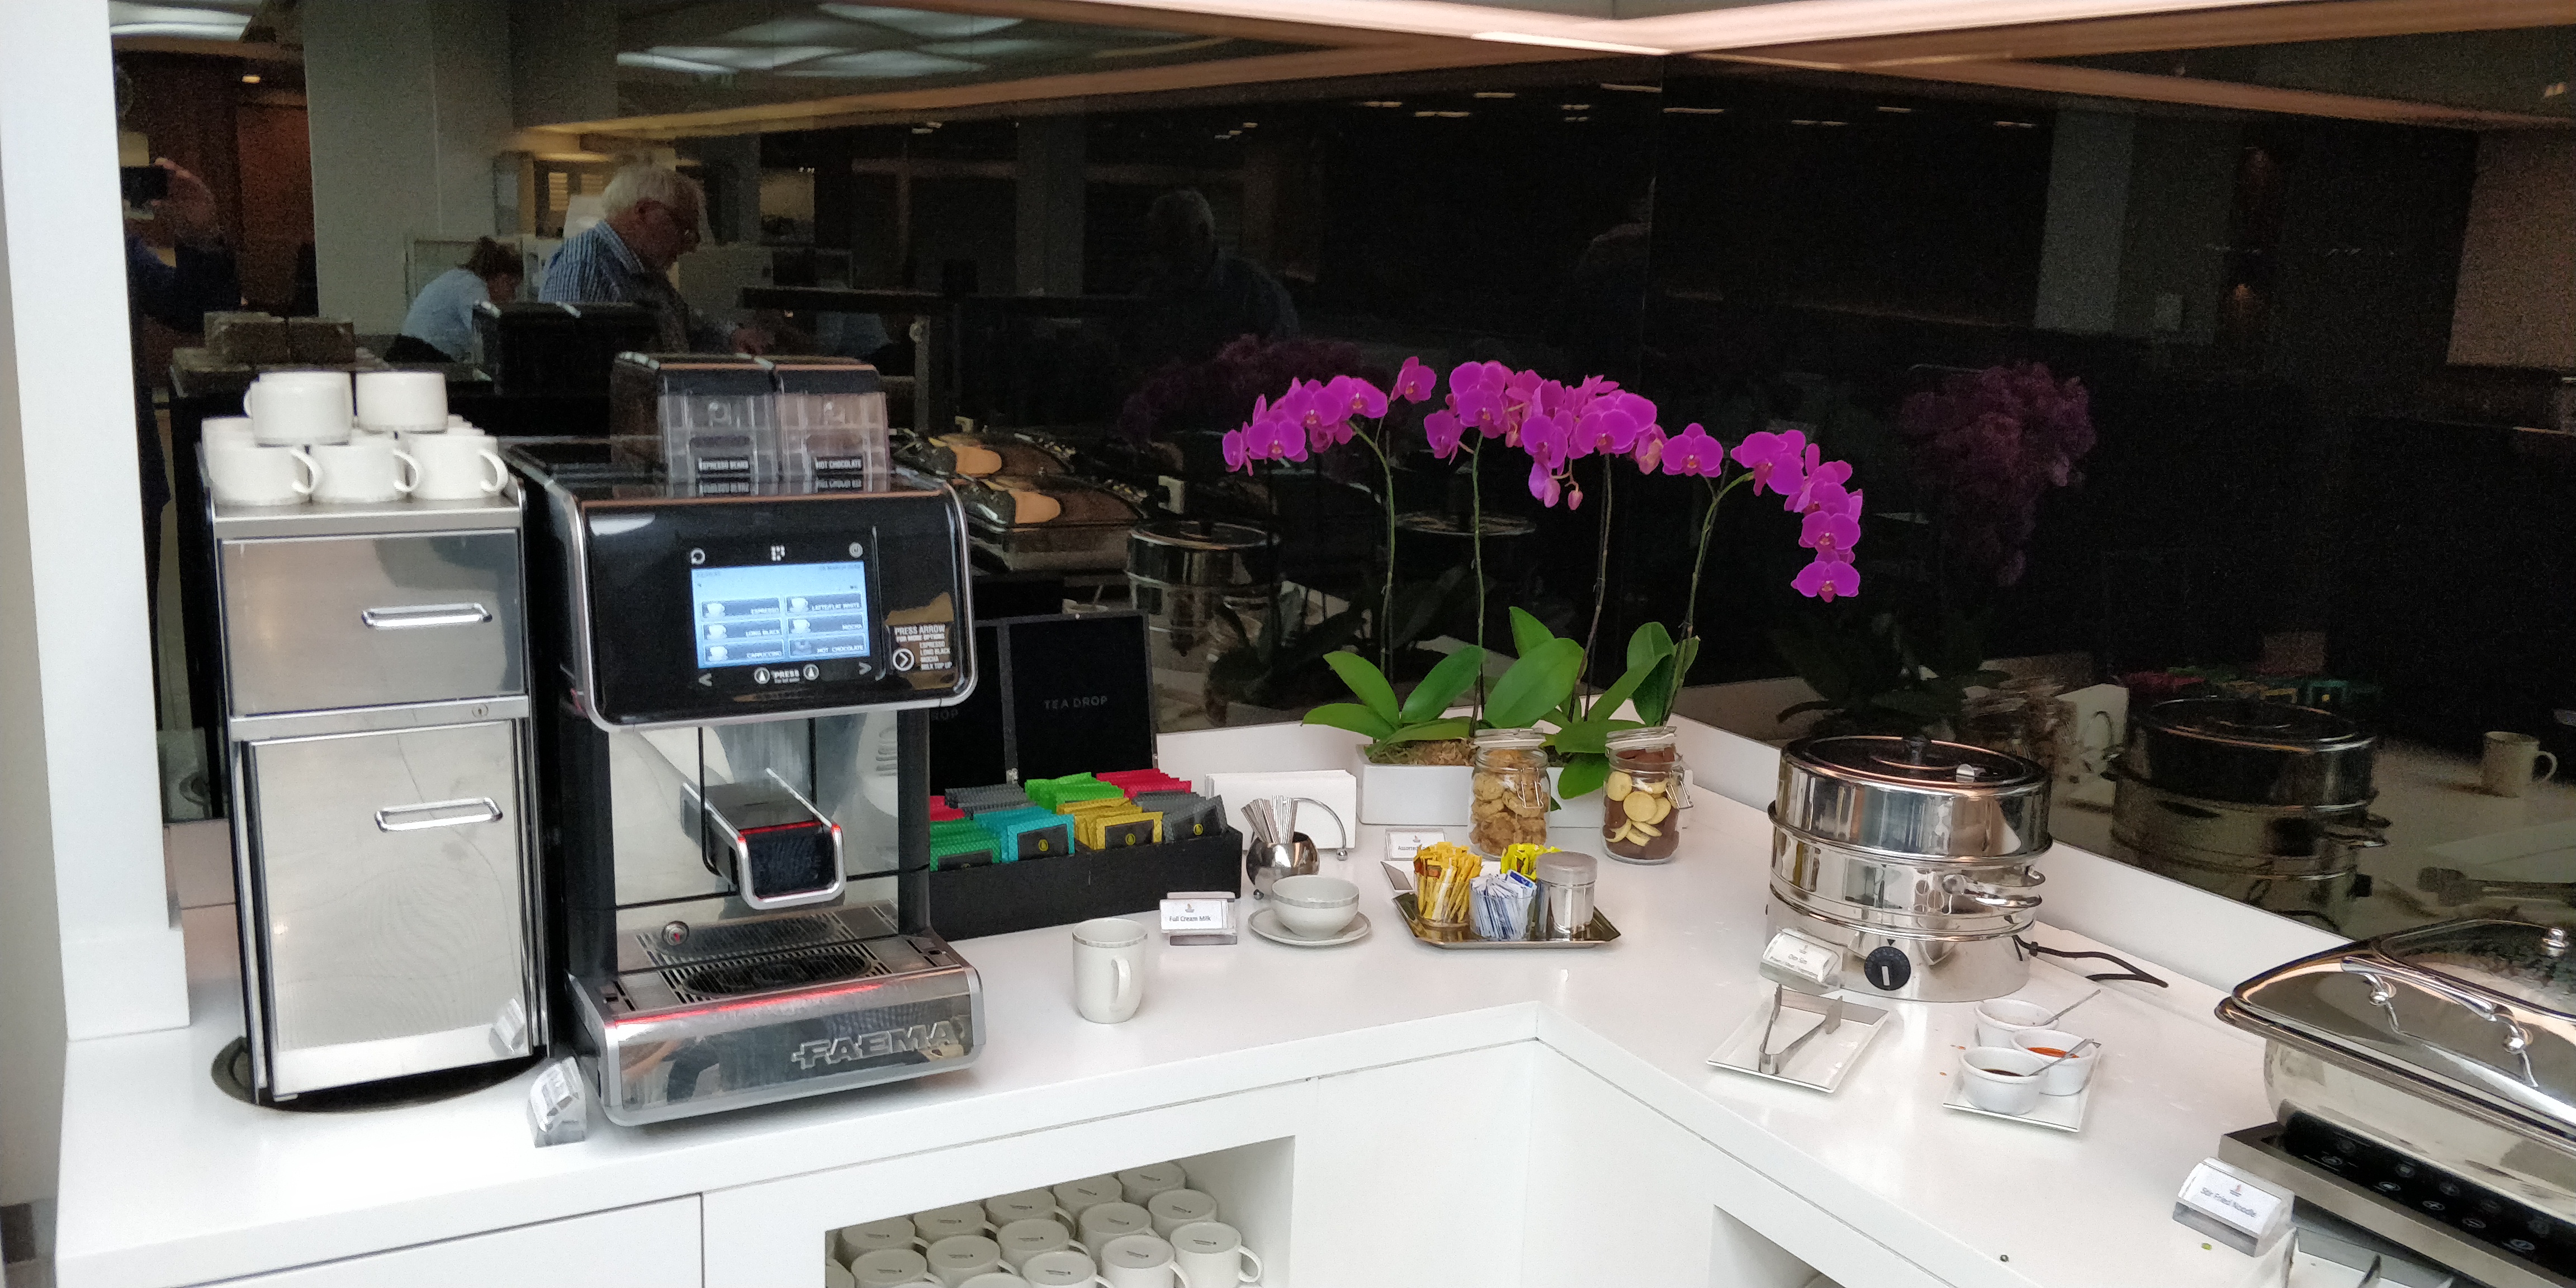 A PICTURE OF THE TEA AND COFFEE COUNTER